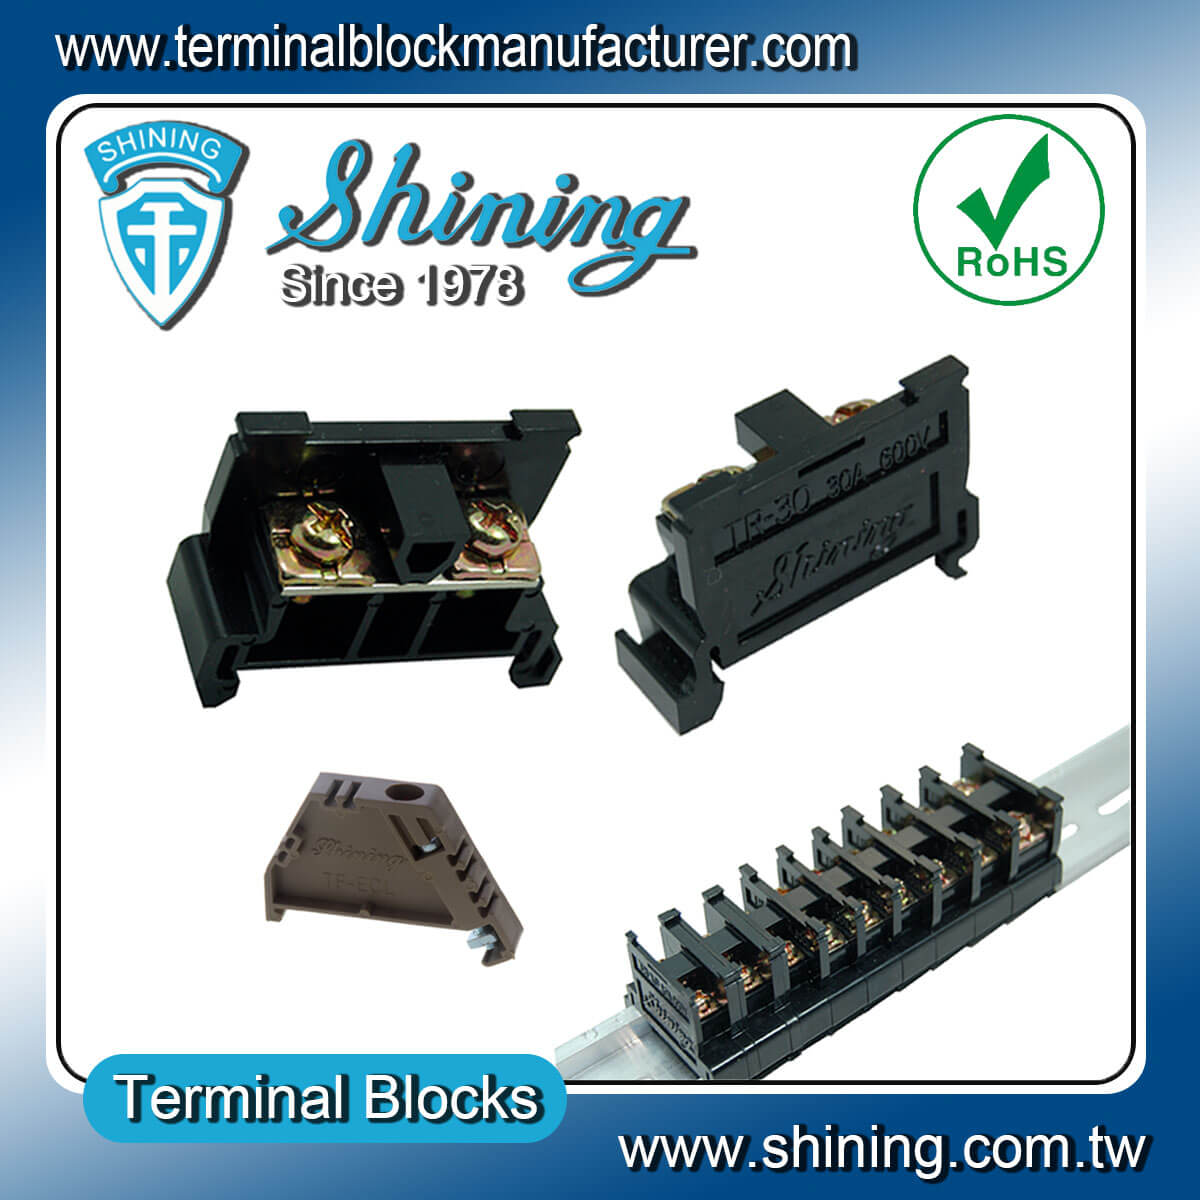 TR-30 35mm Rail Mounted Snap On Type 600V 30A Terminal Block Connector